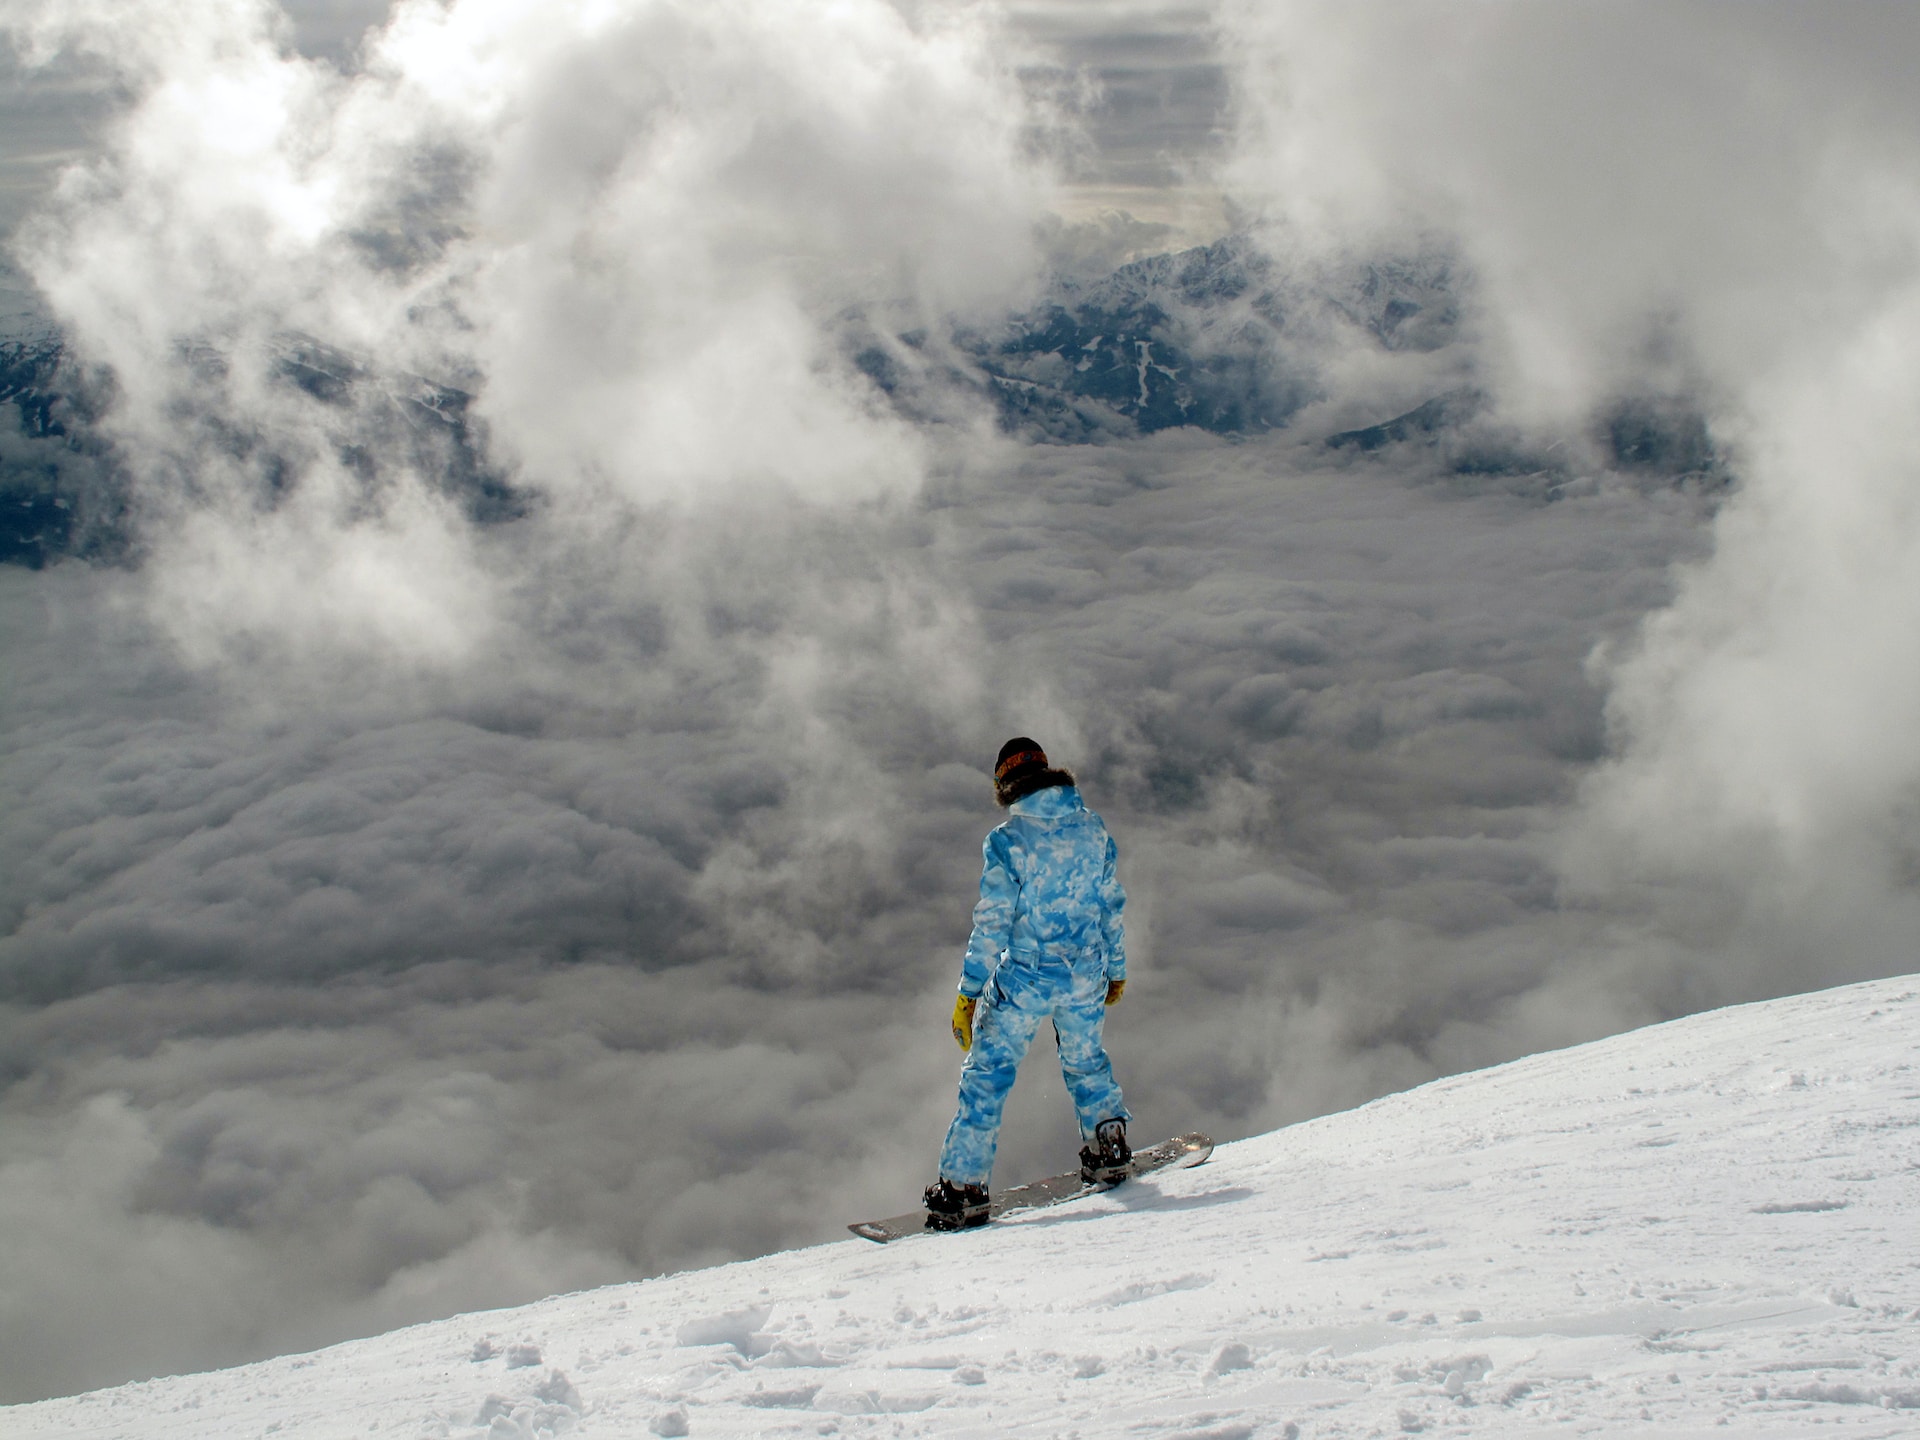 Snowboarder on a cloudy hill. Photo by Boba Jovanovic.